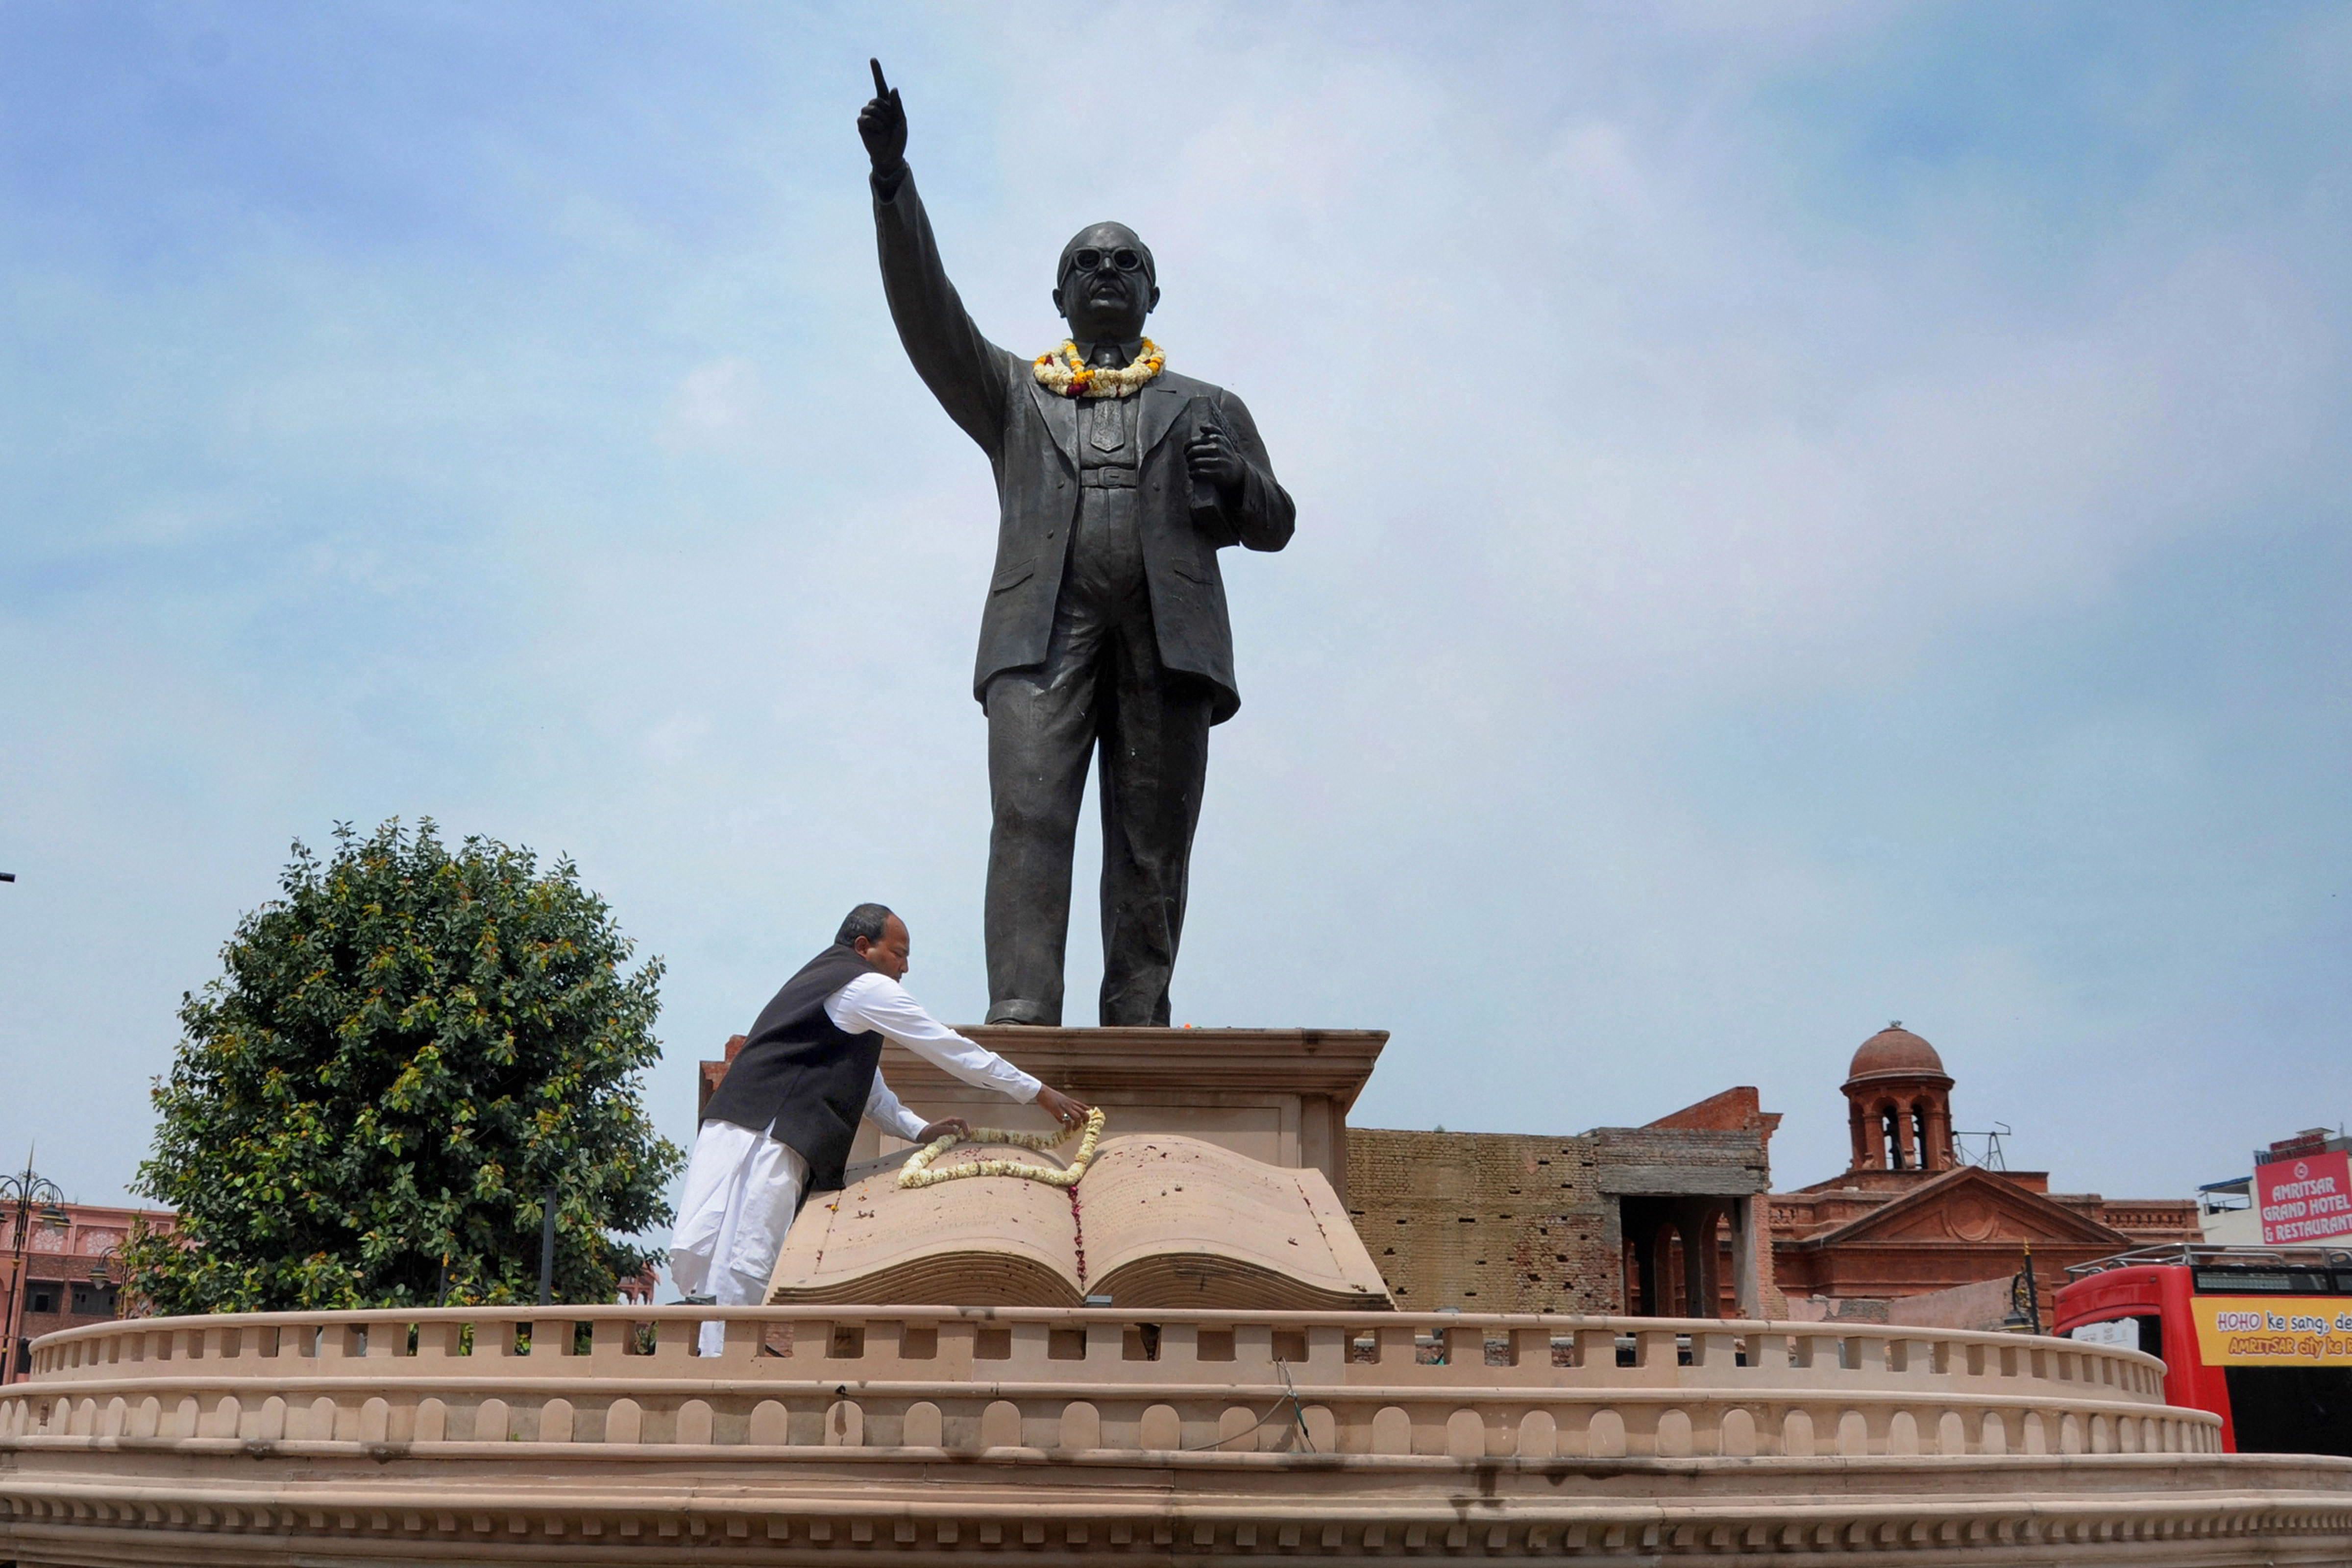 The mouthing of noble principles of equality by politicians through the years and the ritual garlanding of B.R. Ambedkar’s statue has changed very little in social reality and political action. 